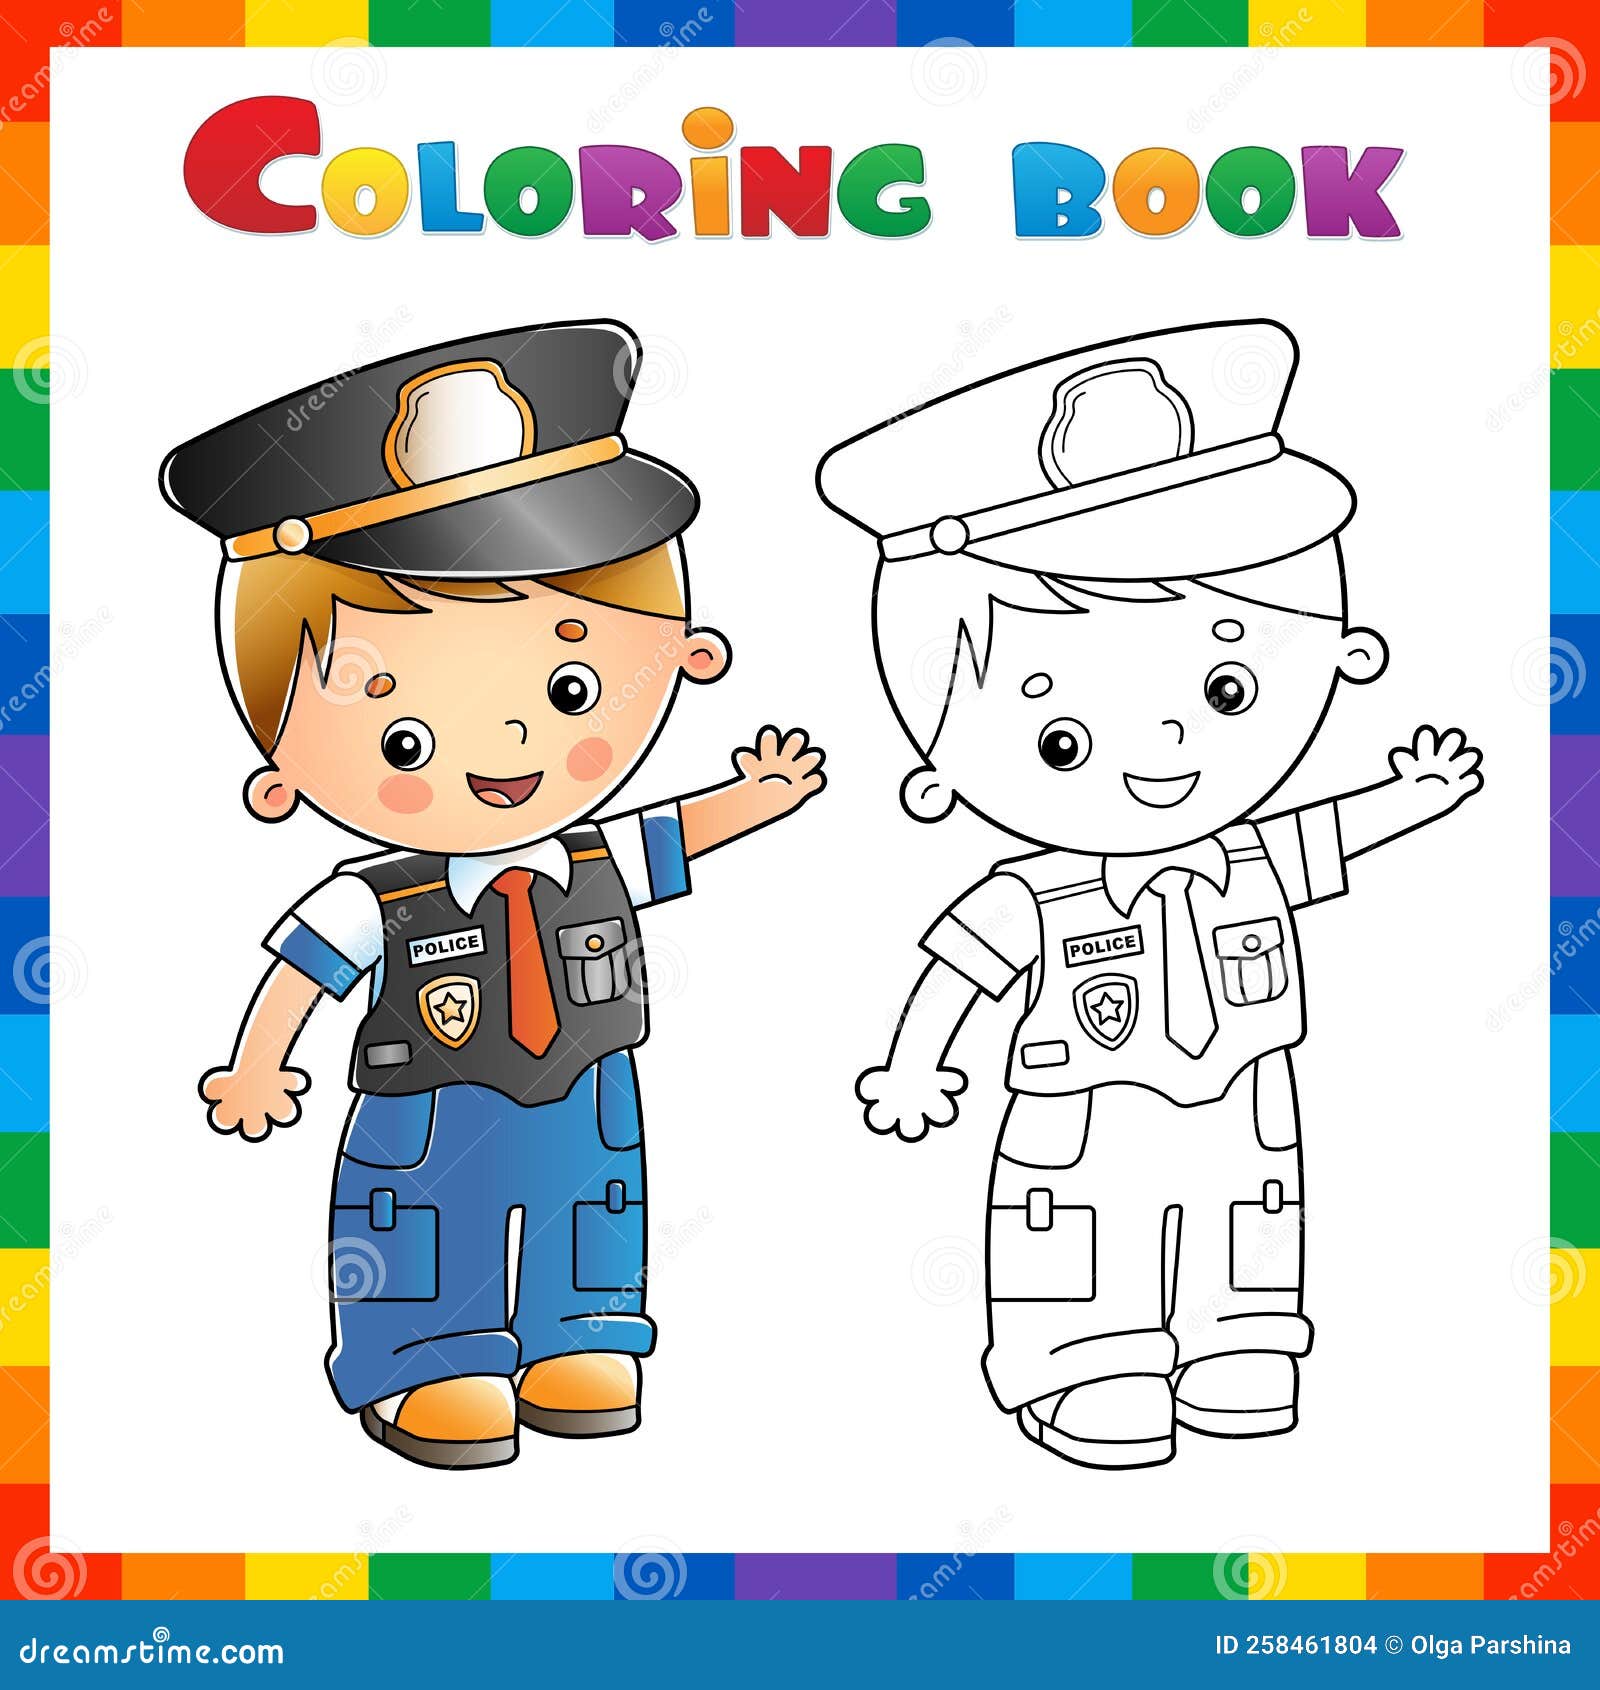 Coloring page outline of cartoon policeman profession